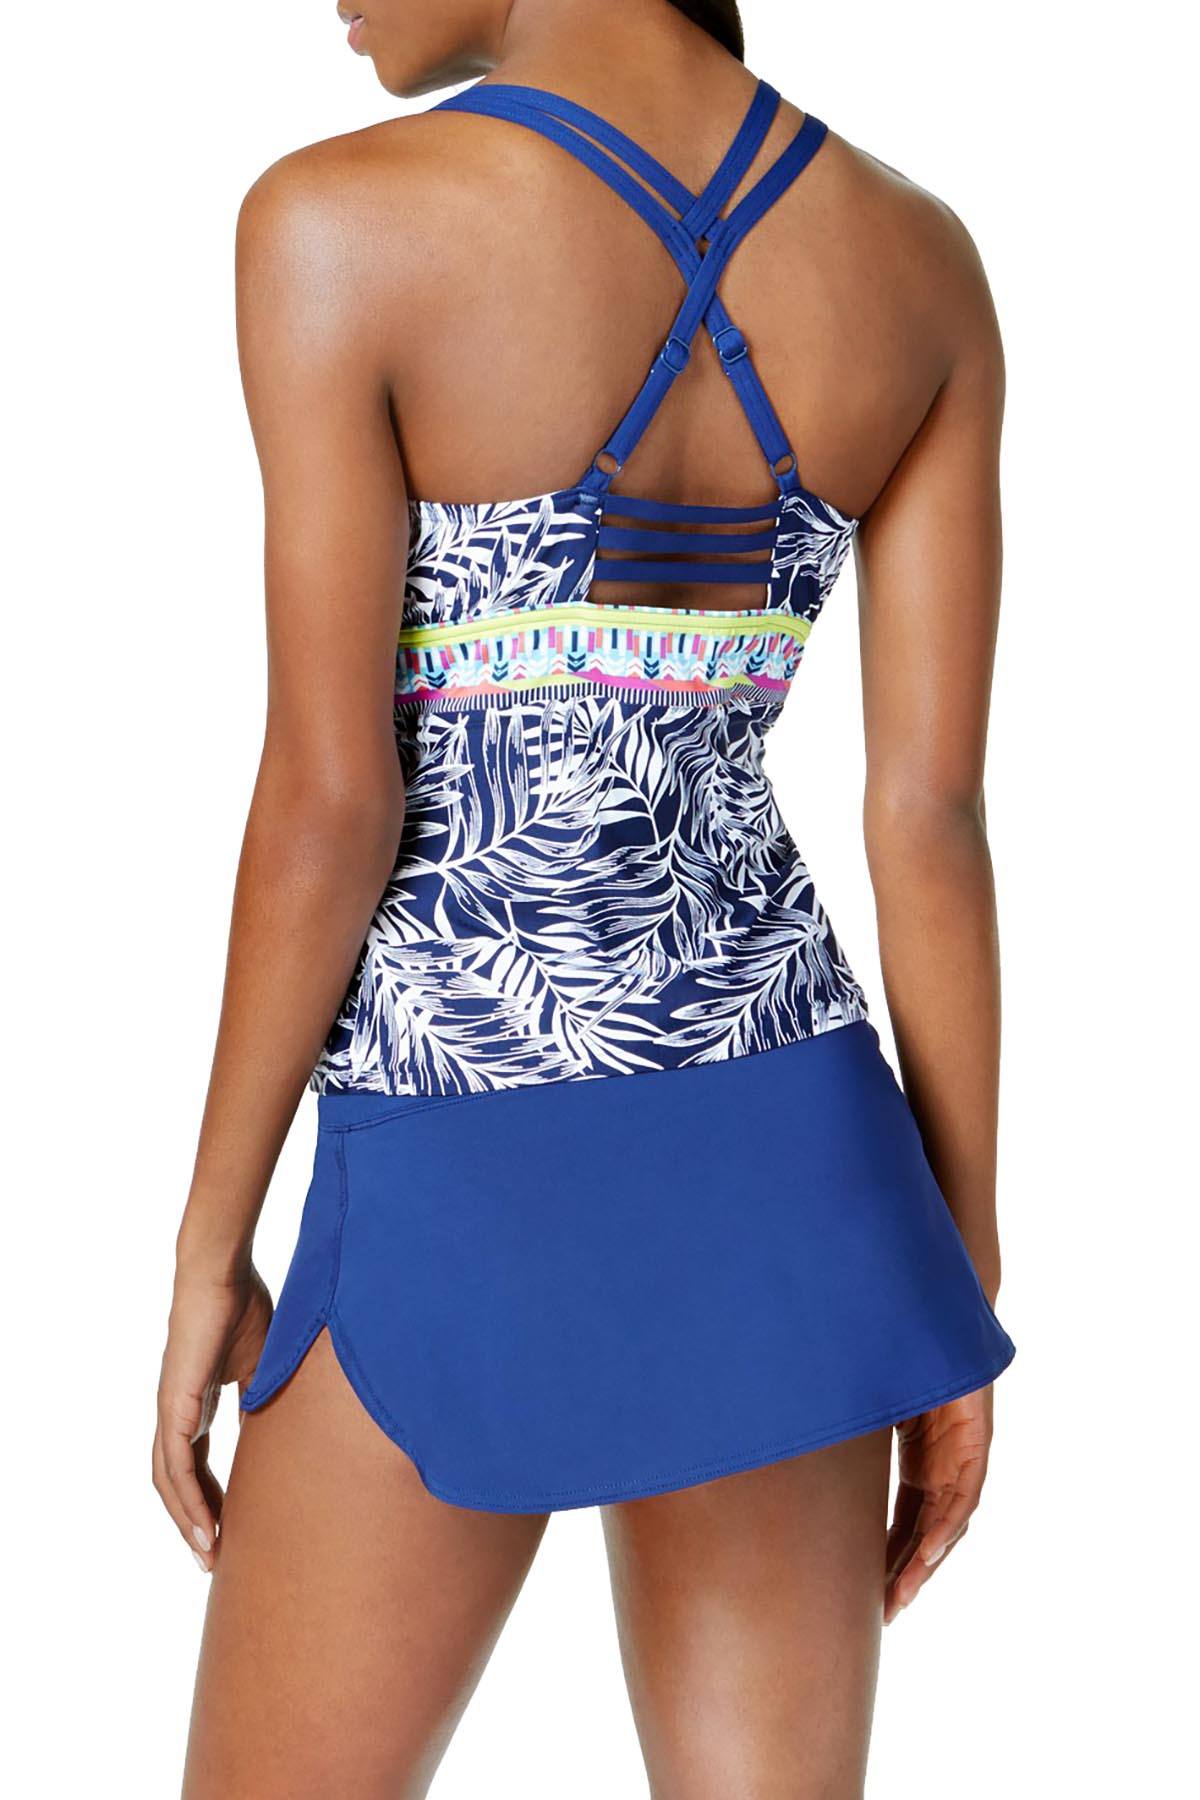 JAG Navy Tropical Palm D-Cup Underwire Tankini Top | CheapUndies